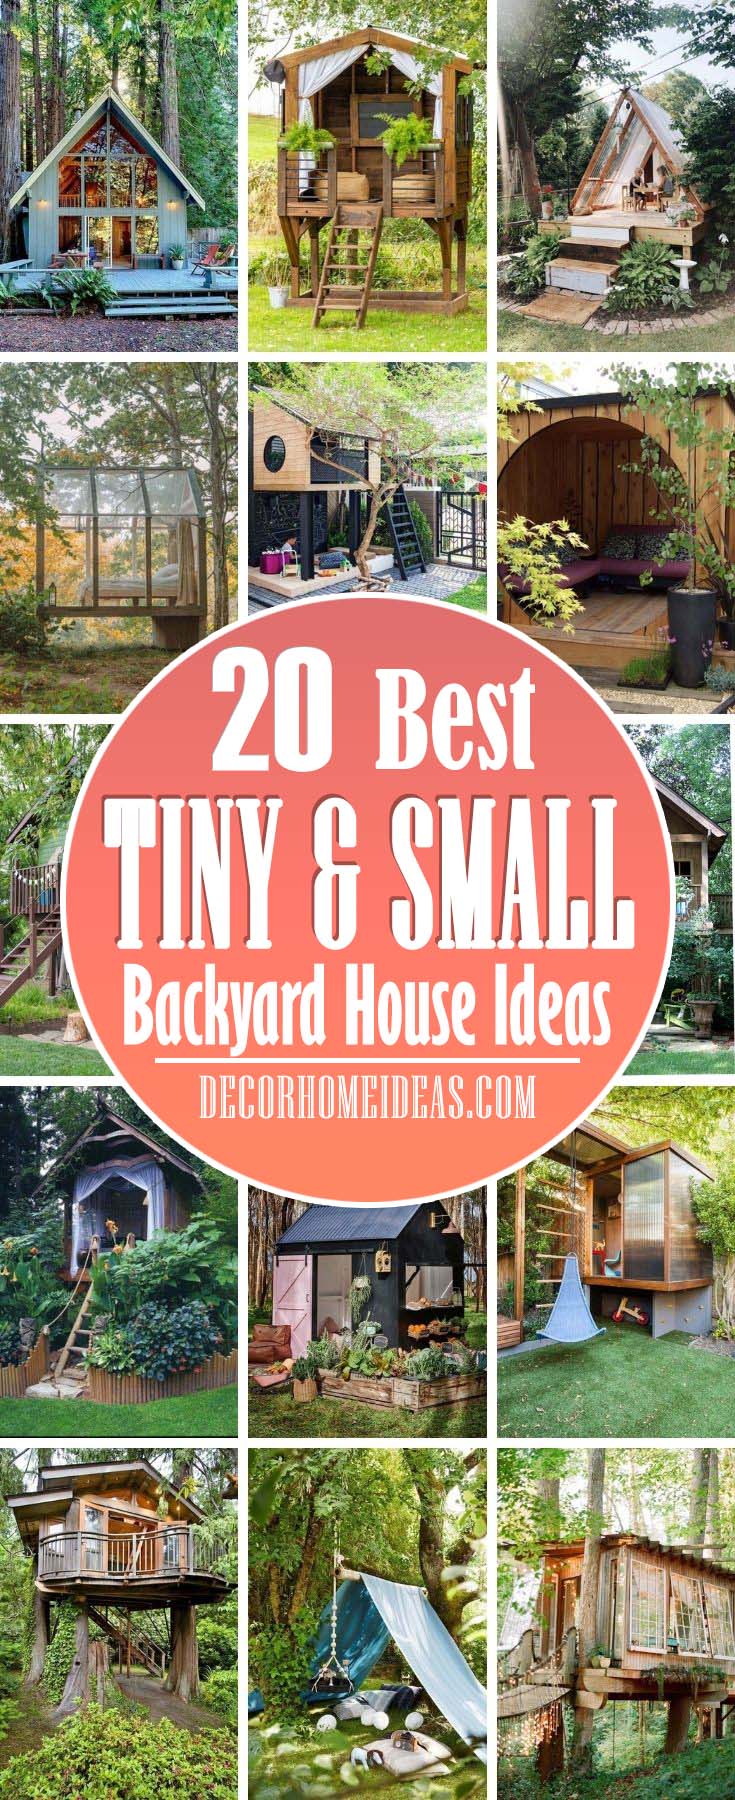 Best Small Backyard House Ideas. If you think there is something missing in your backyard why don't you add a small backyard house. It could be a perfect relaxation retreat or a place your kids would use as a place to play games. #decorhomeideas